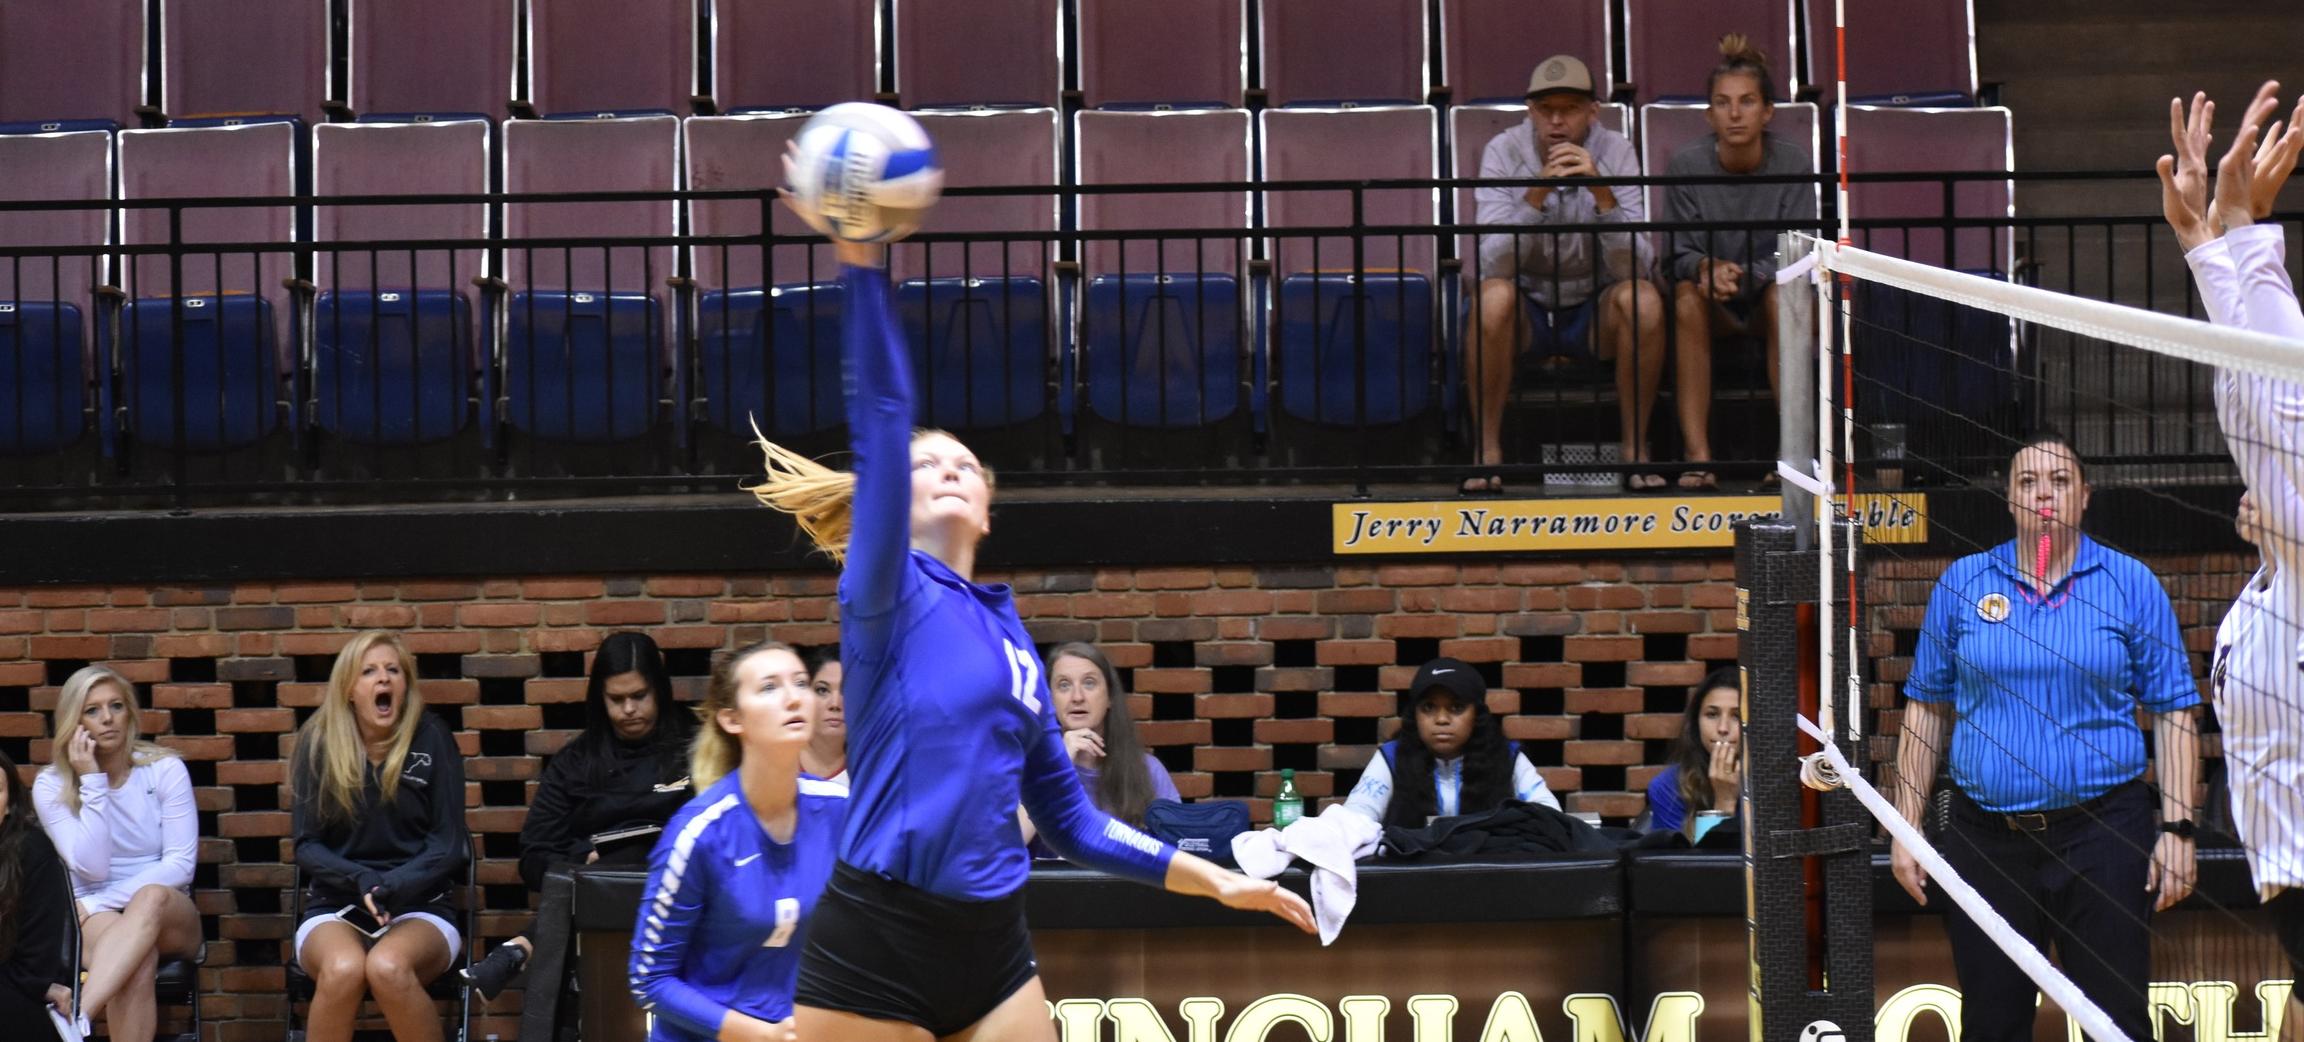 Senior middle-hitter Raley Shirey tallied a career-high 11 kills in Saturday's season-opening victory over Agnes Scott.